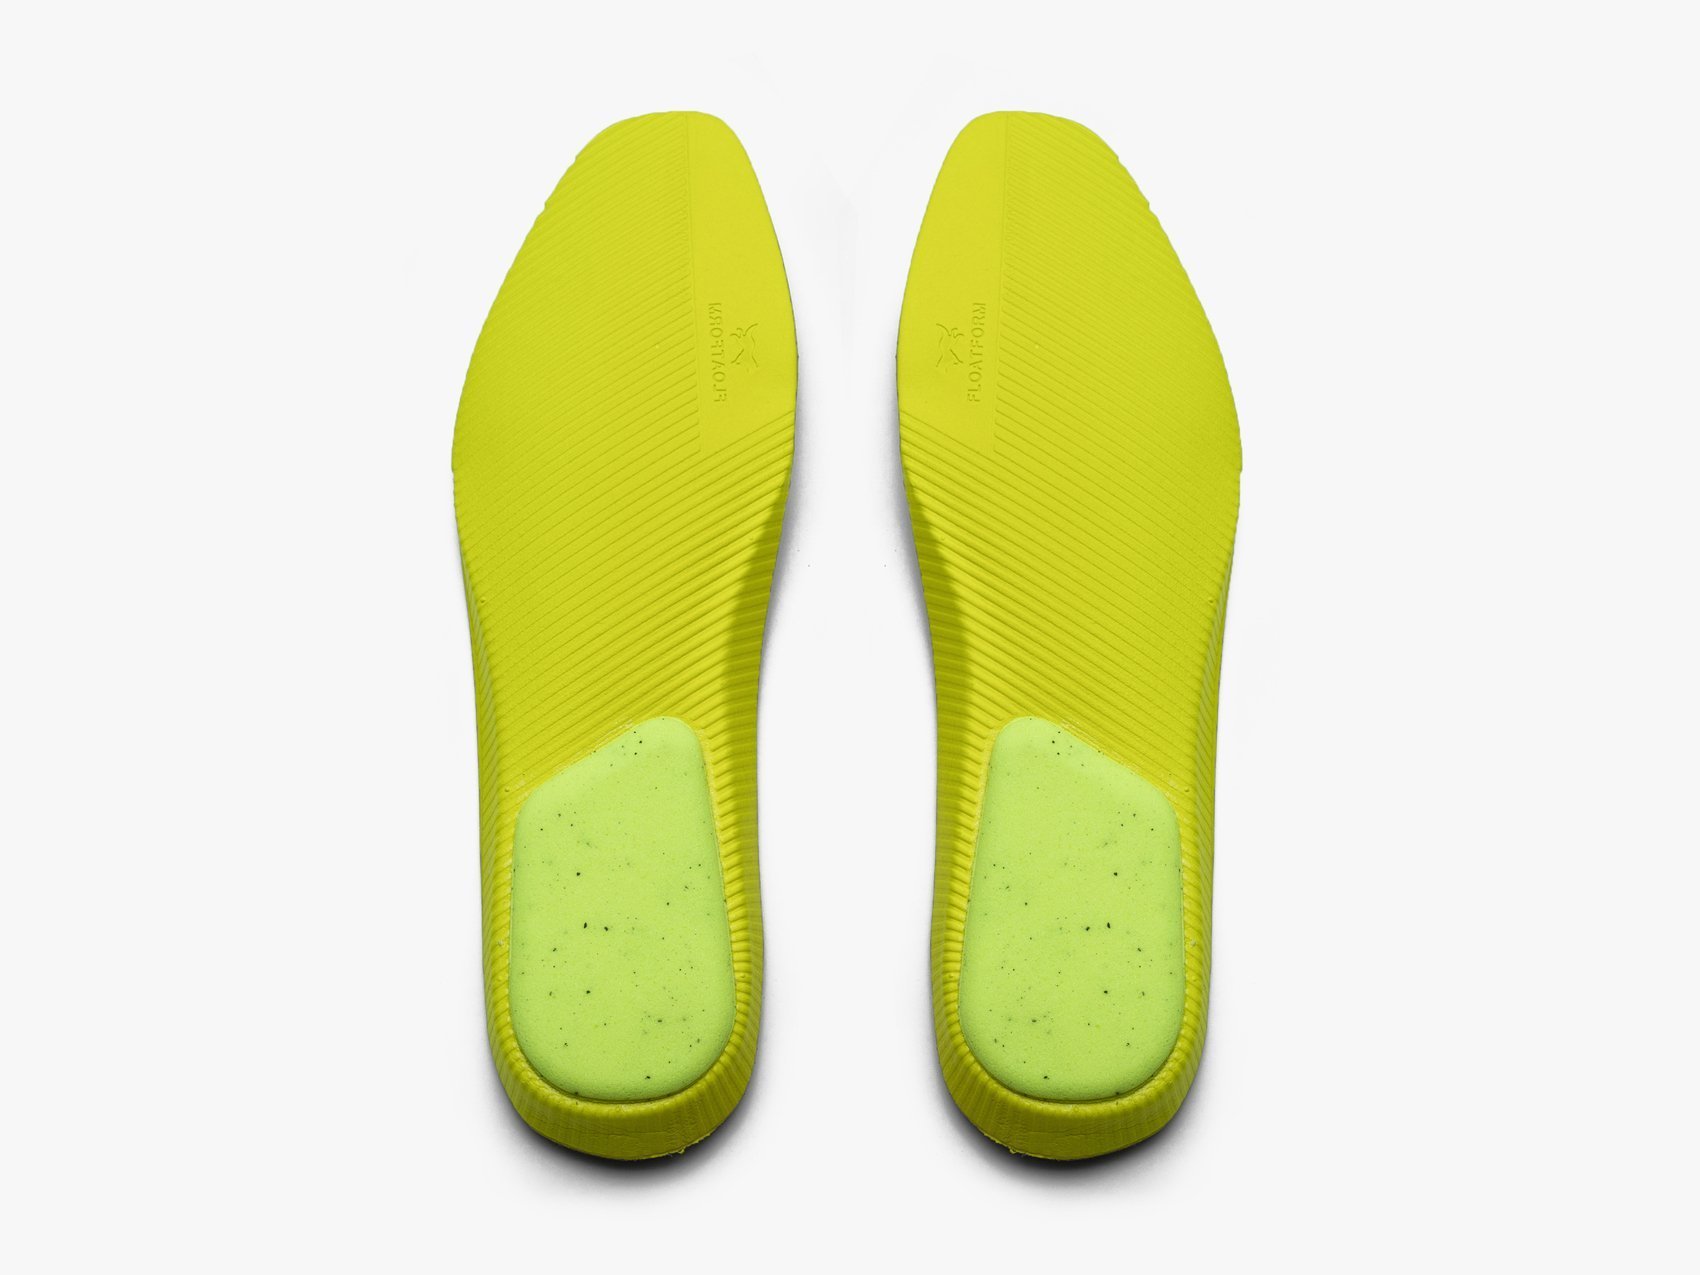 Detail view of yellow shoe sole on a white background
